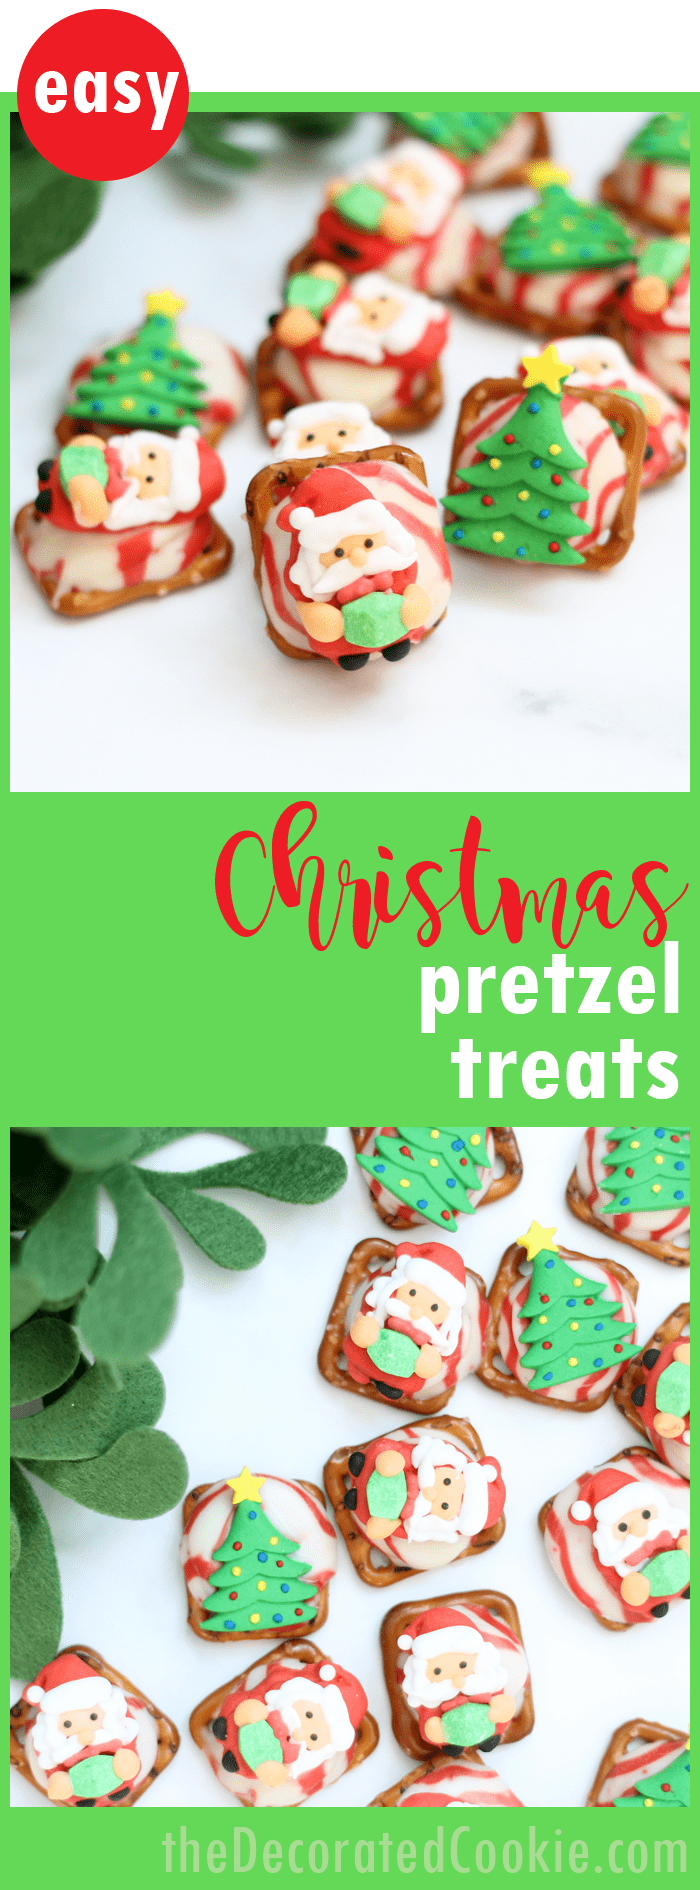 Easy Christmas pretzel treats, minutes to make, video recipe included